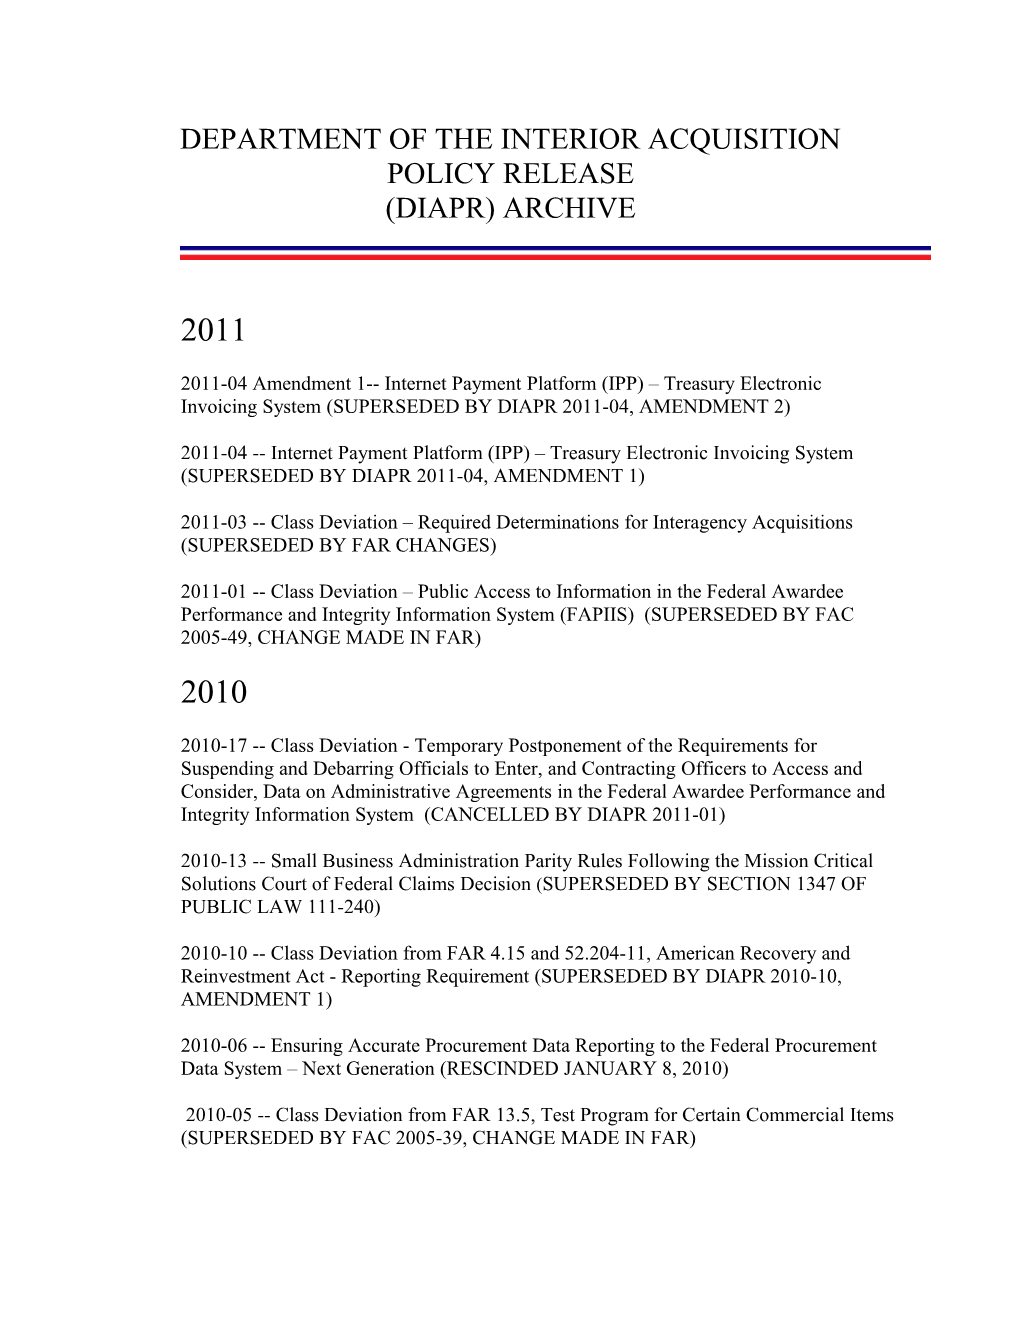 Department of the Interior Acquisition Policy Release (Diapr) Archive